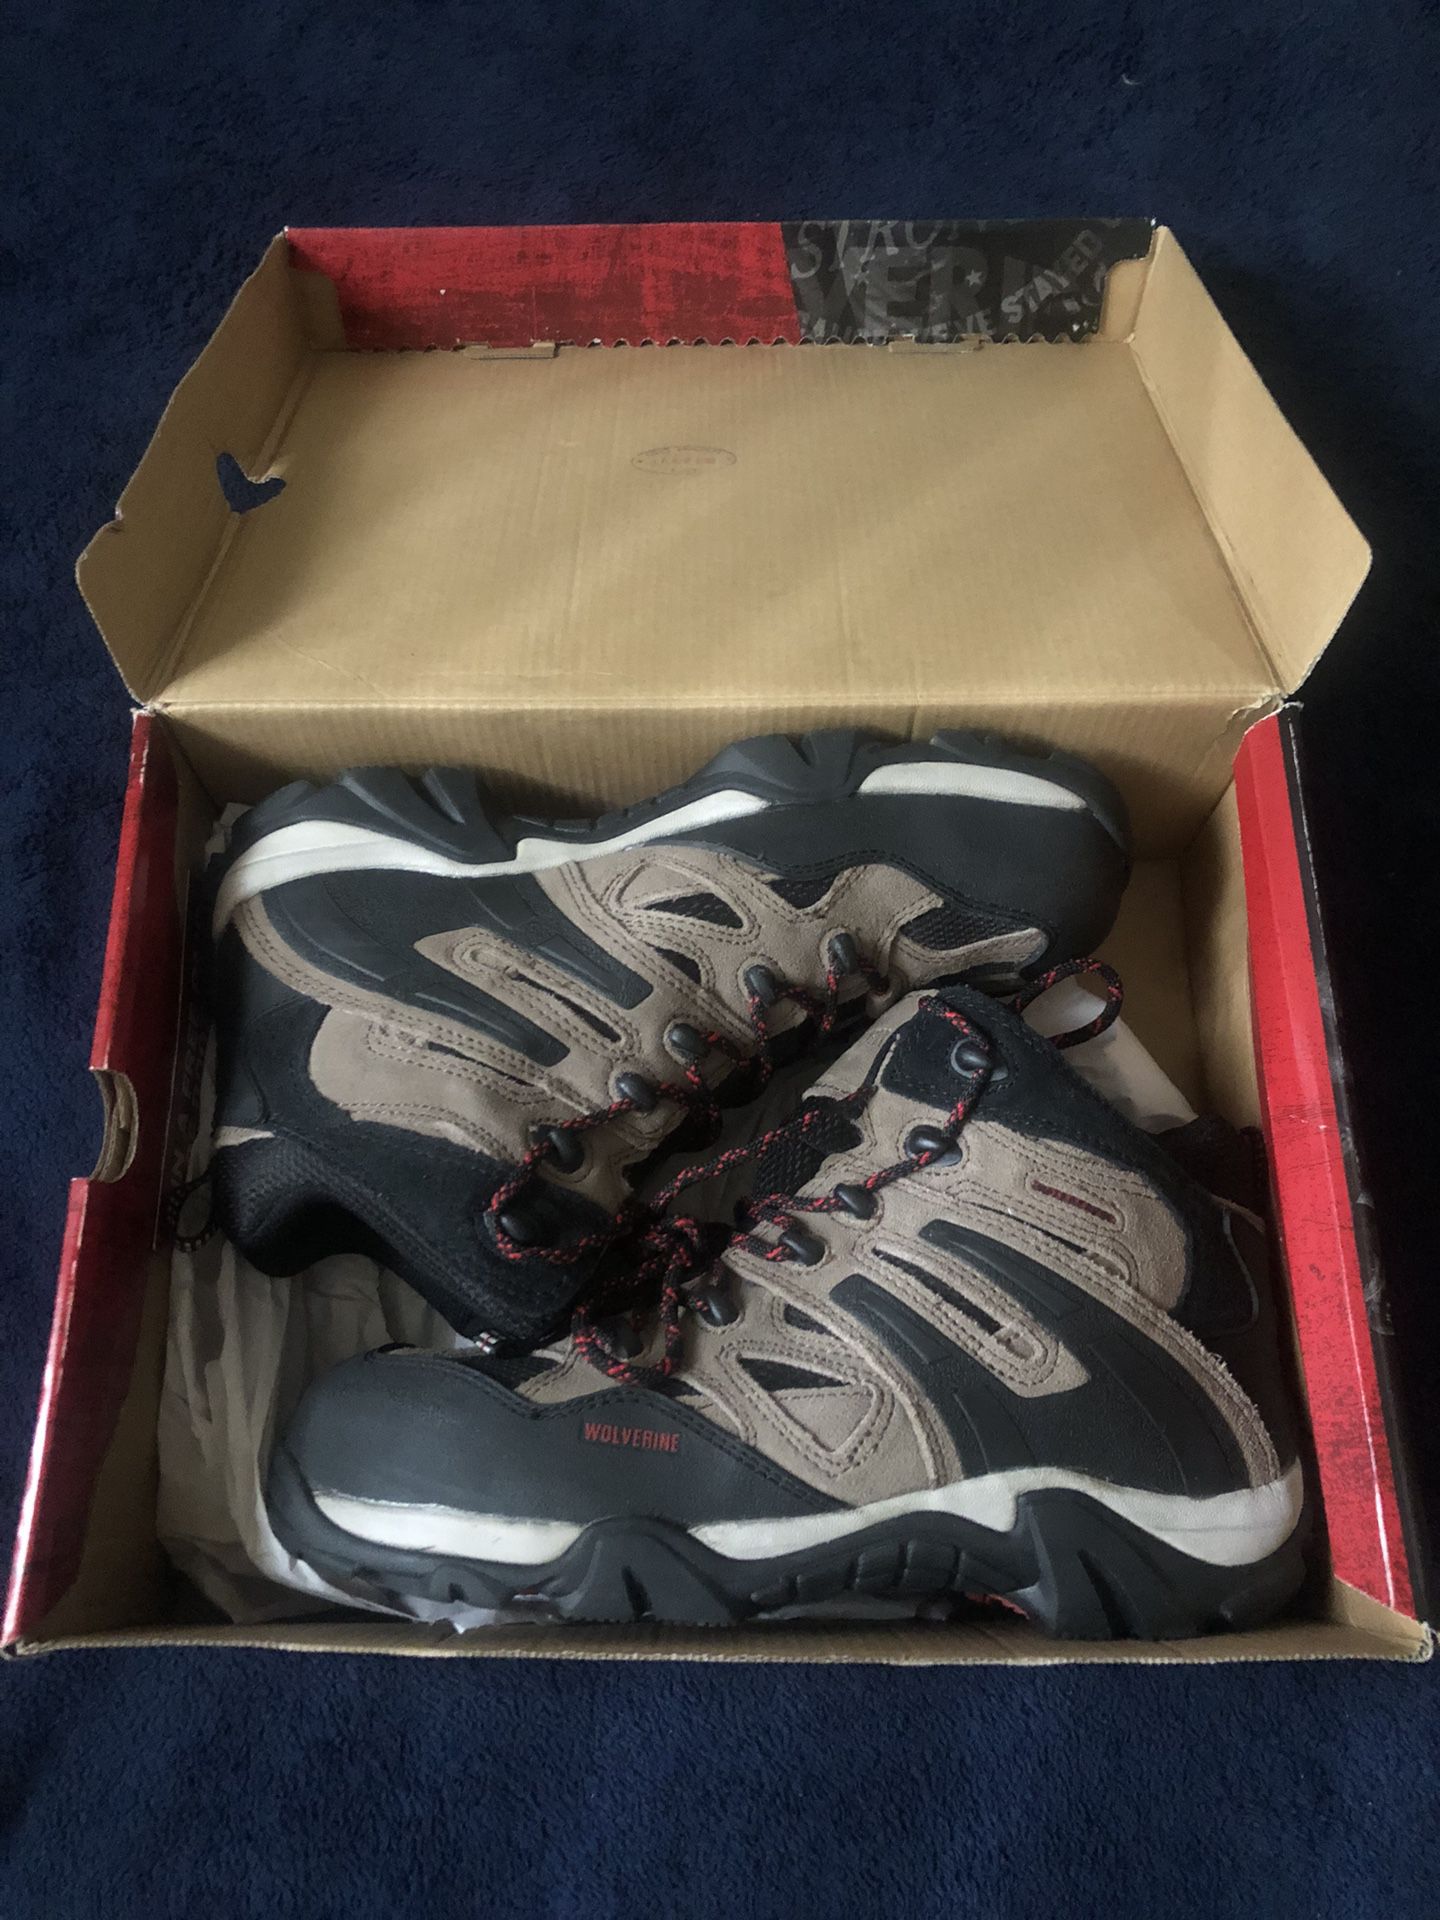 Brand New Wolverines Hiking Boots / Work Boots 